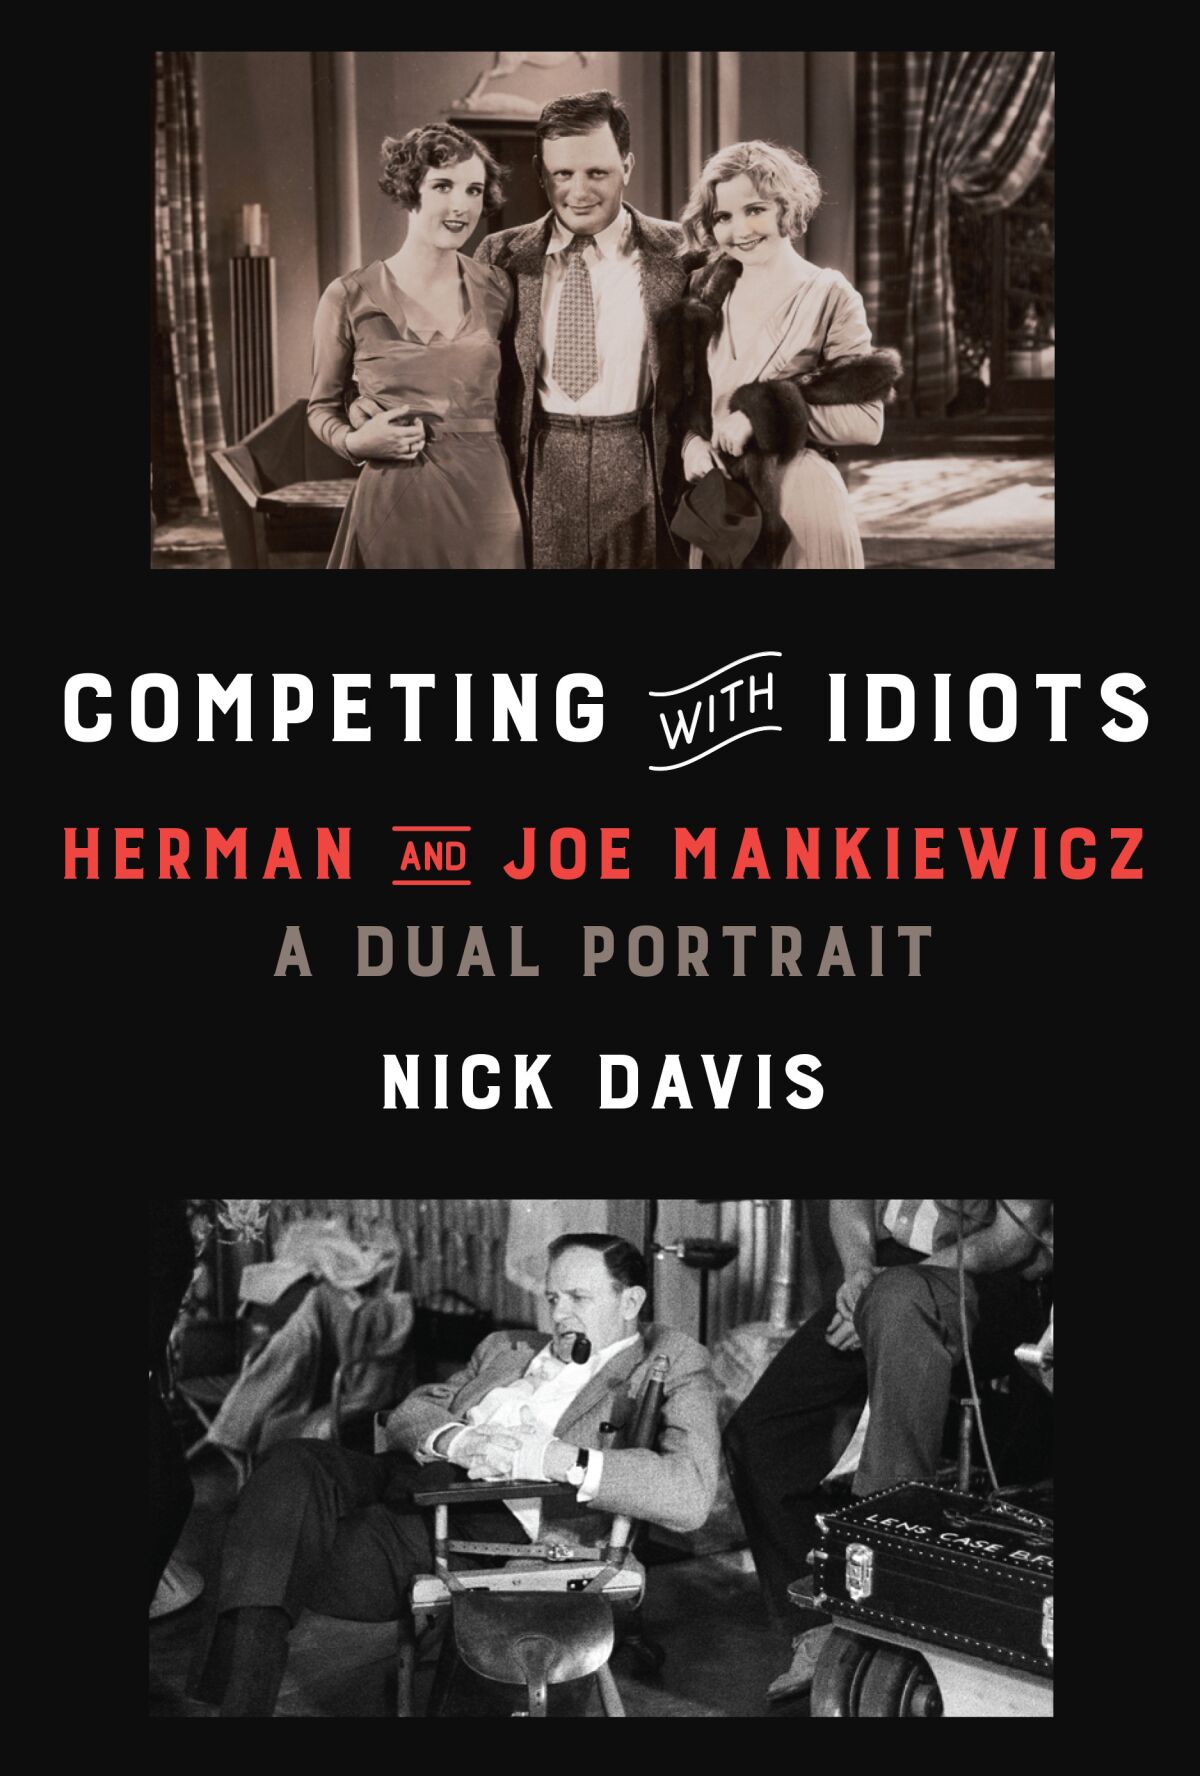 "Competing with Idiots," by Nick Davis